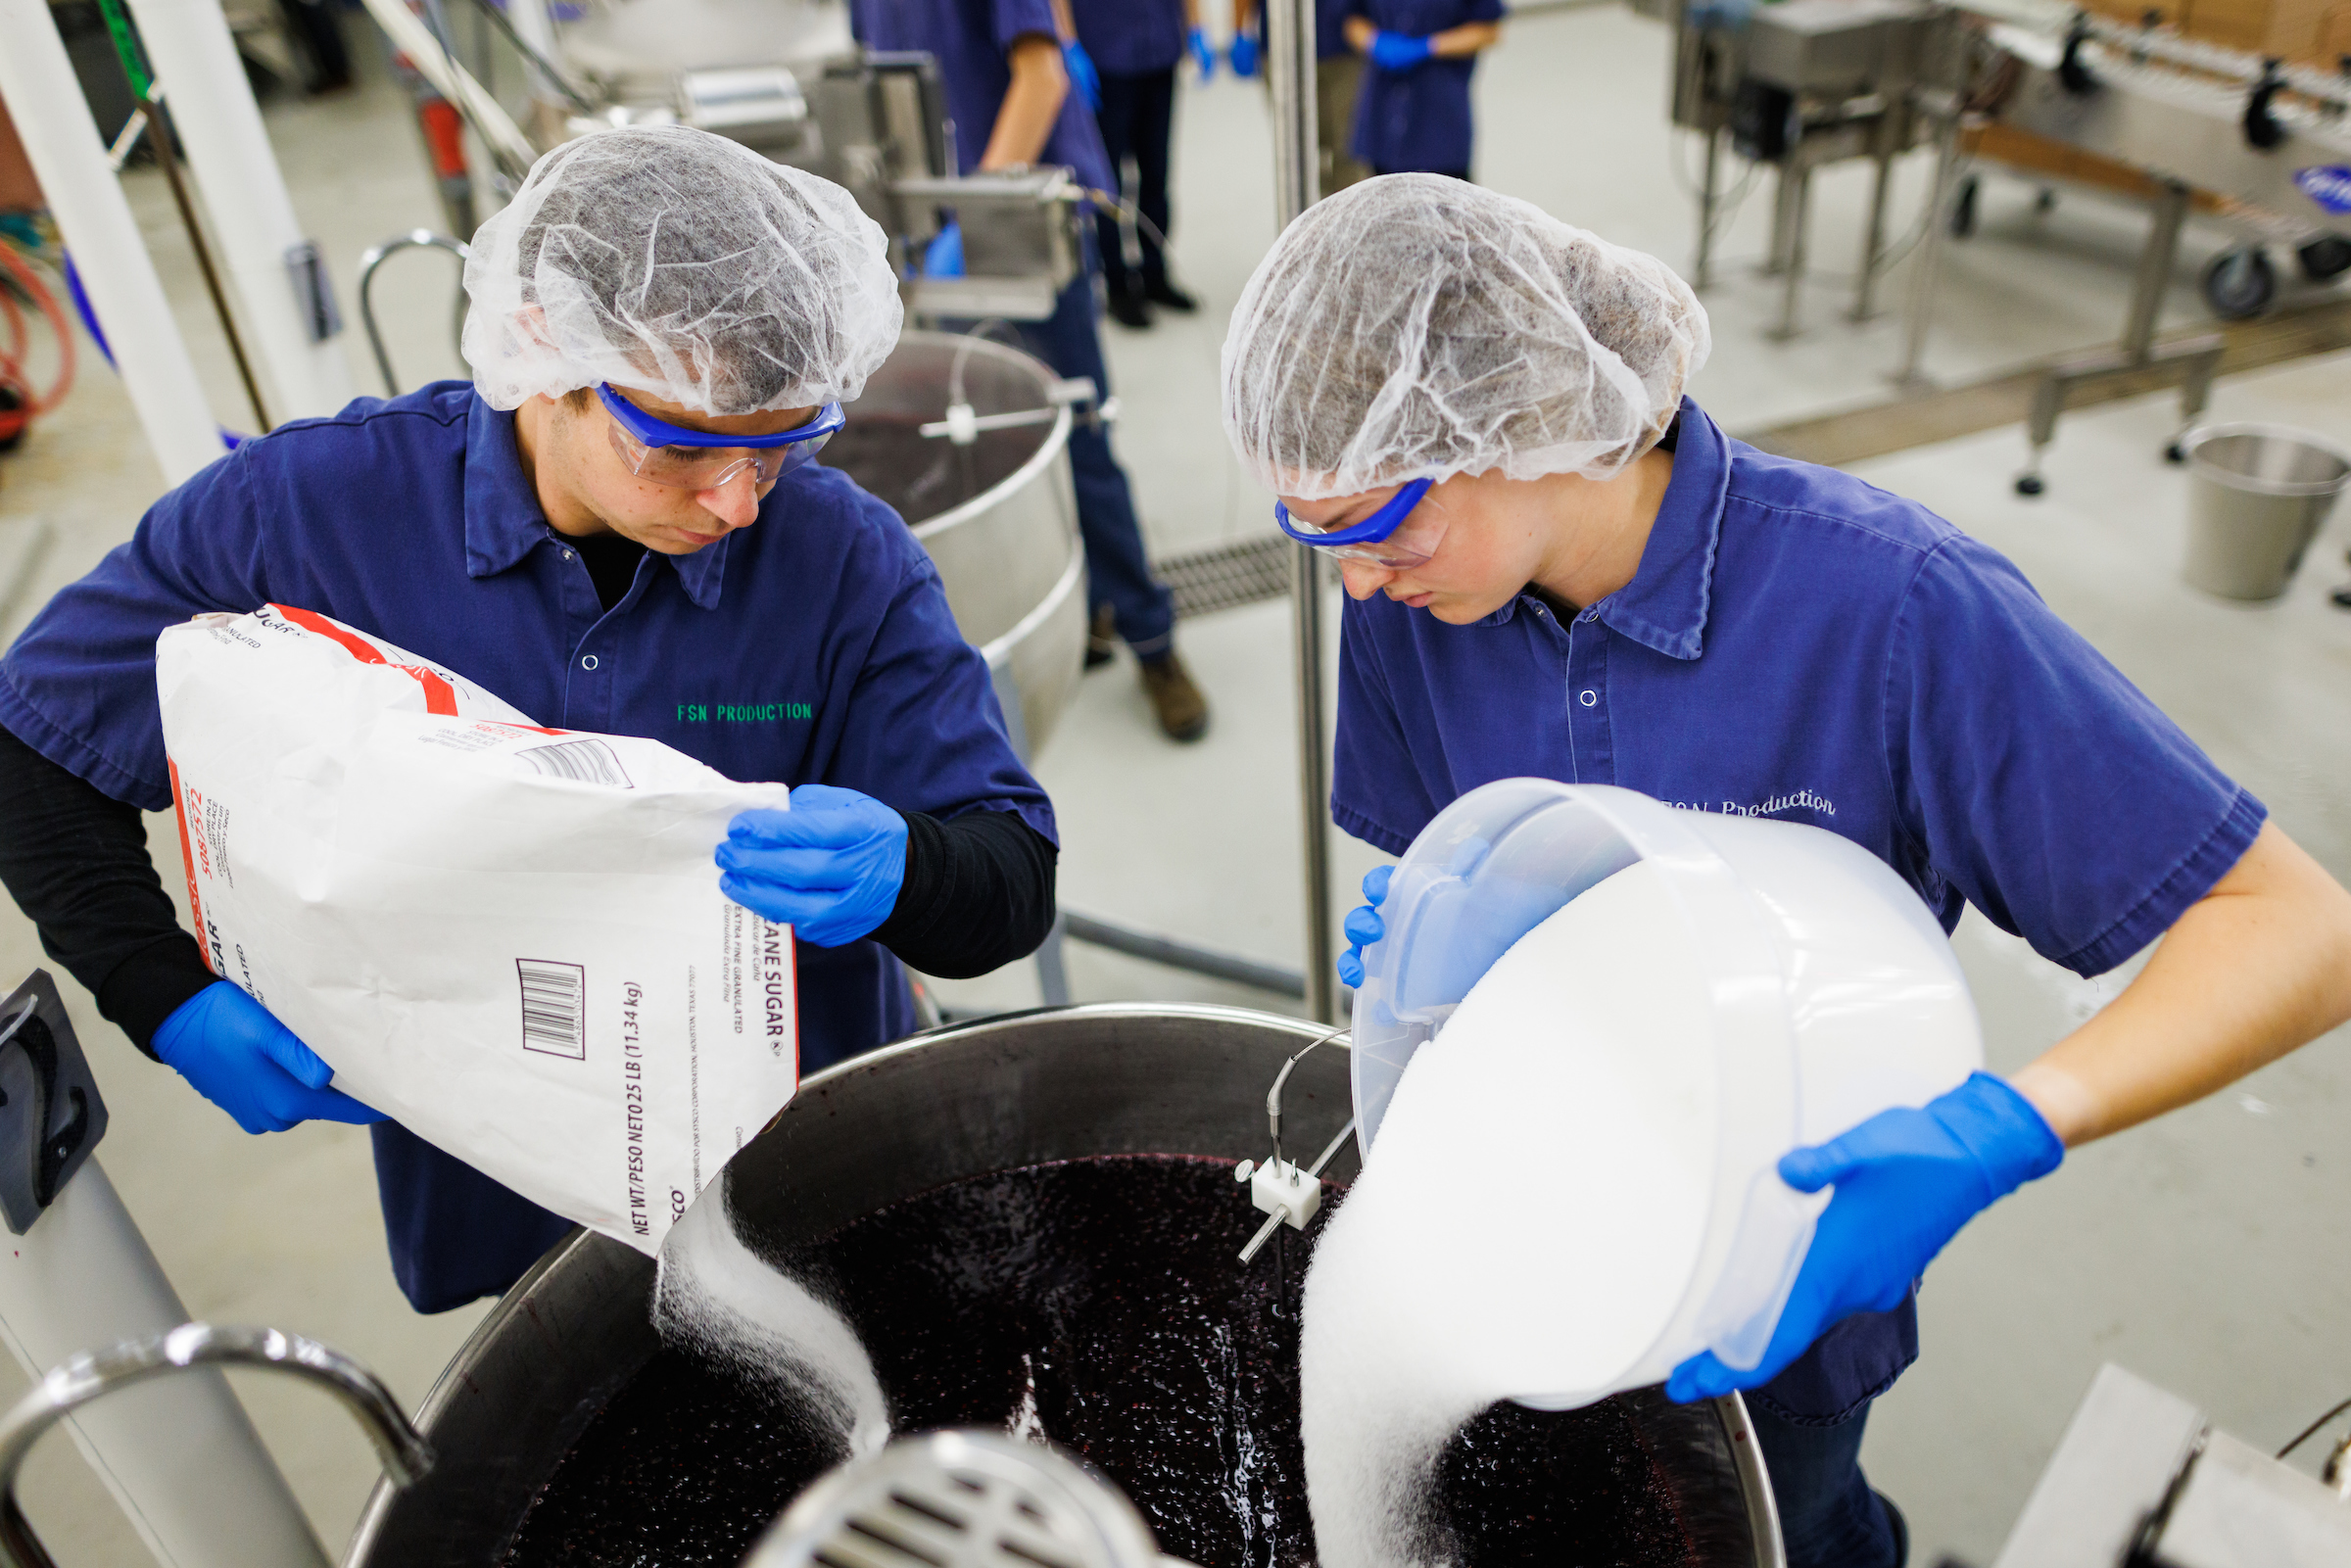 Students wearing safety gear pour sacks of sugar into a batch of jam.